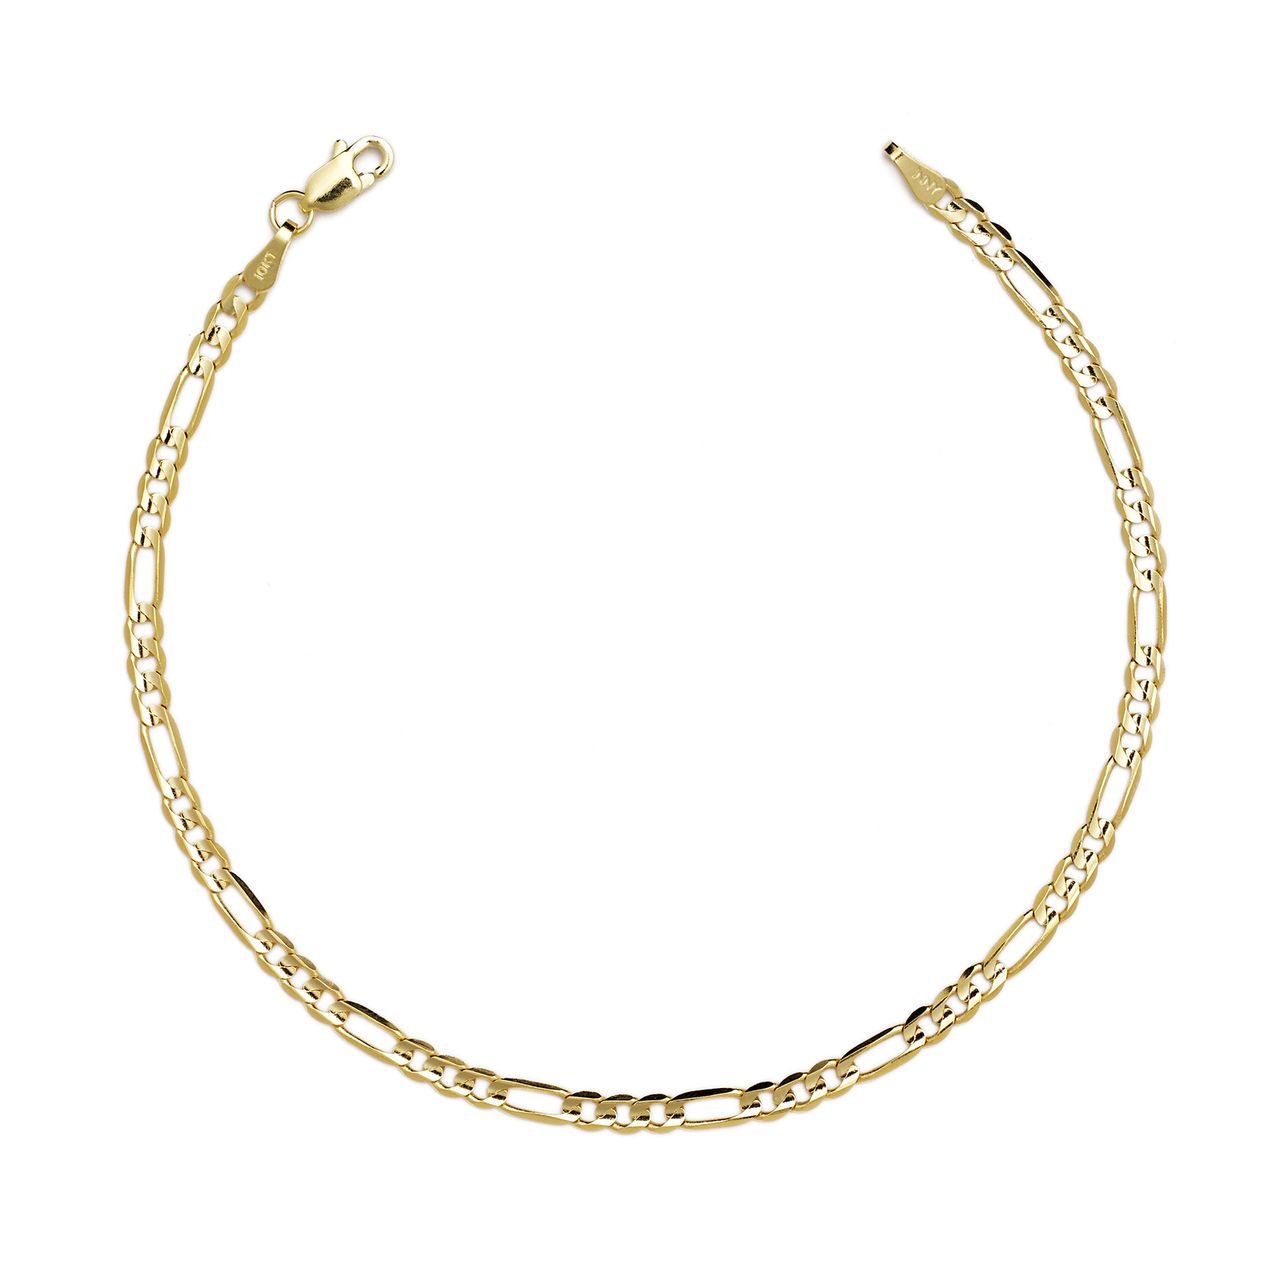 10k Yellow Gold Figaro Chain Bracelet with Concave Look, 0.1 Inch (2.5mm)